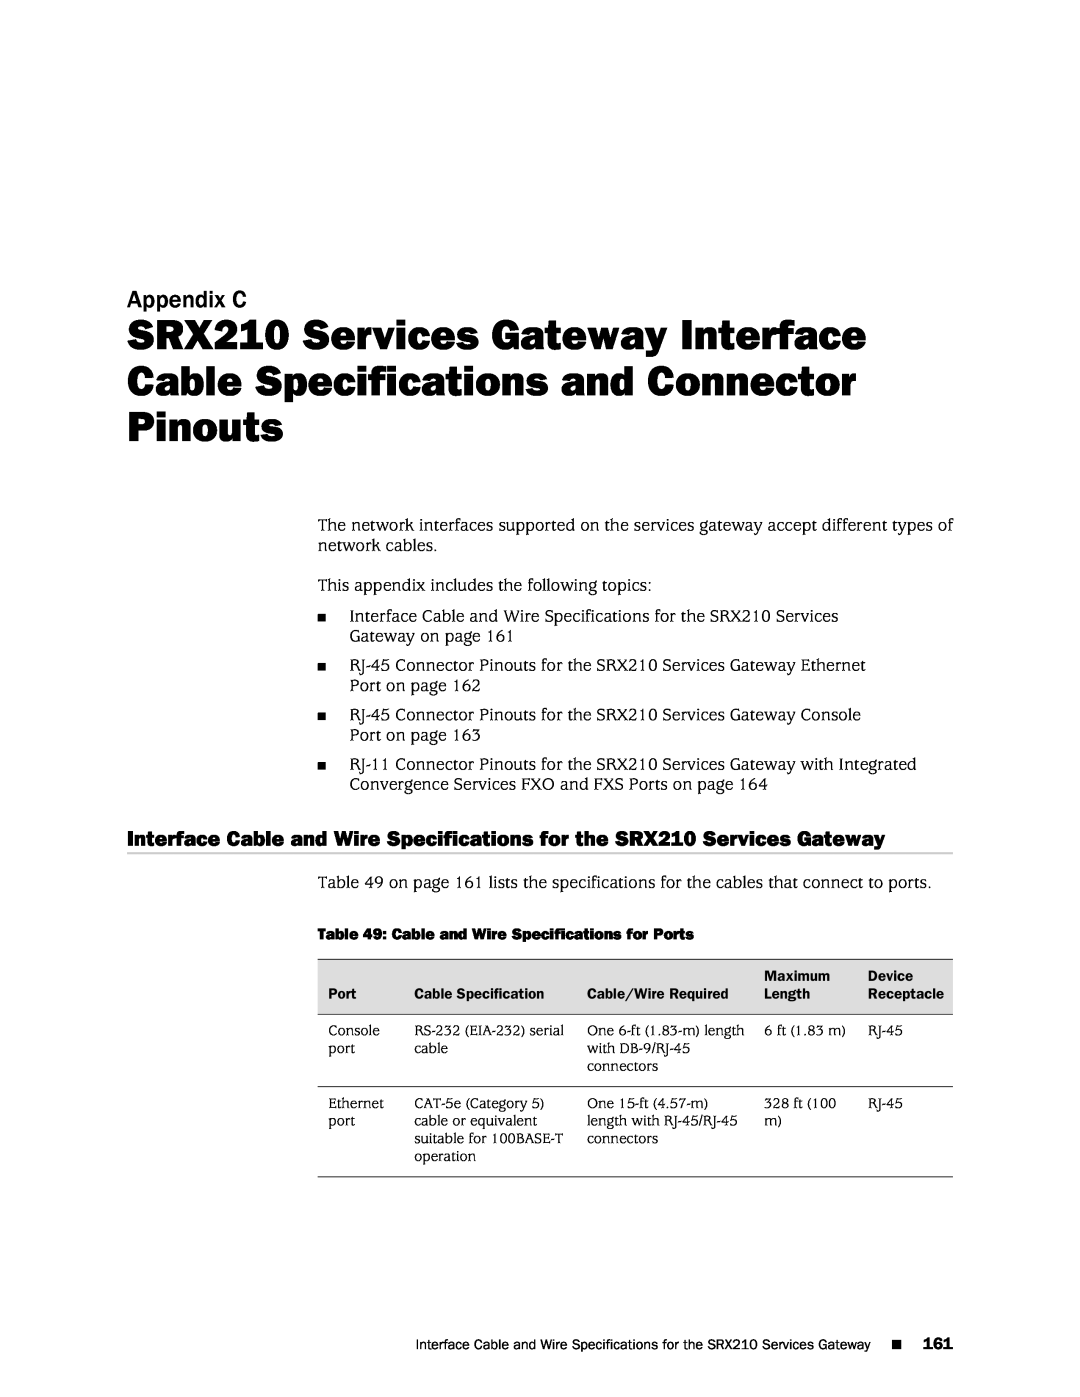 Juniper Networks SRX 210 manual SRX210 Services Gateway Interface Cable Specifications and Connector, Pinouts, Appendix C 